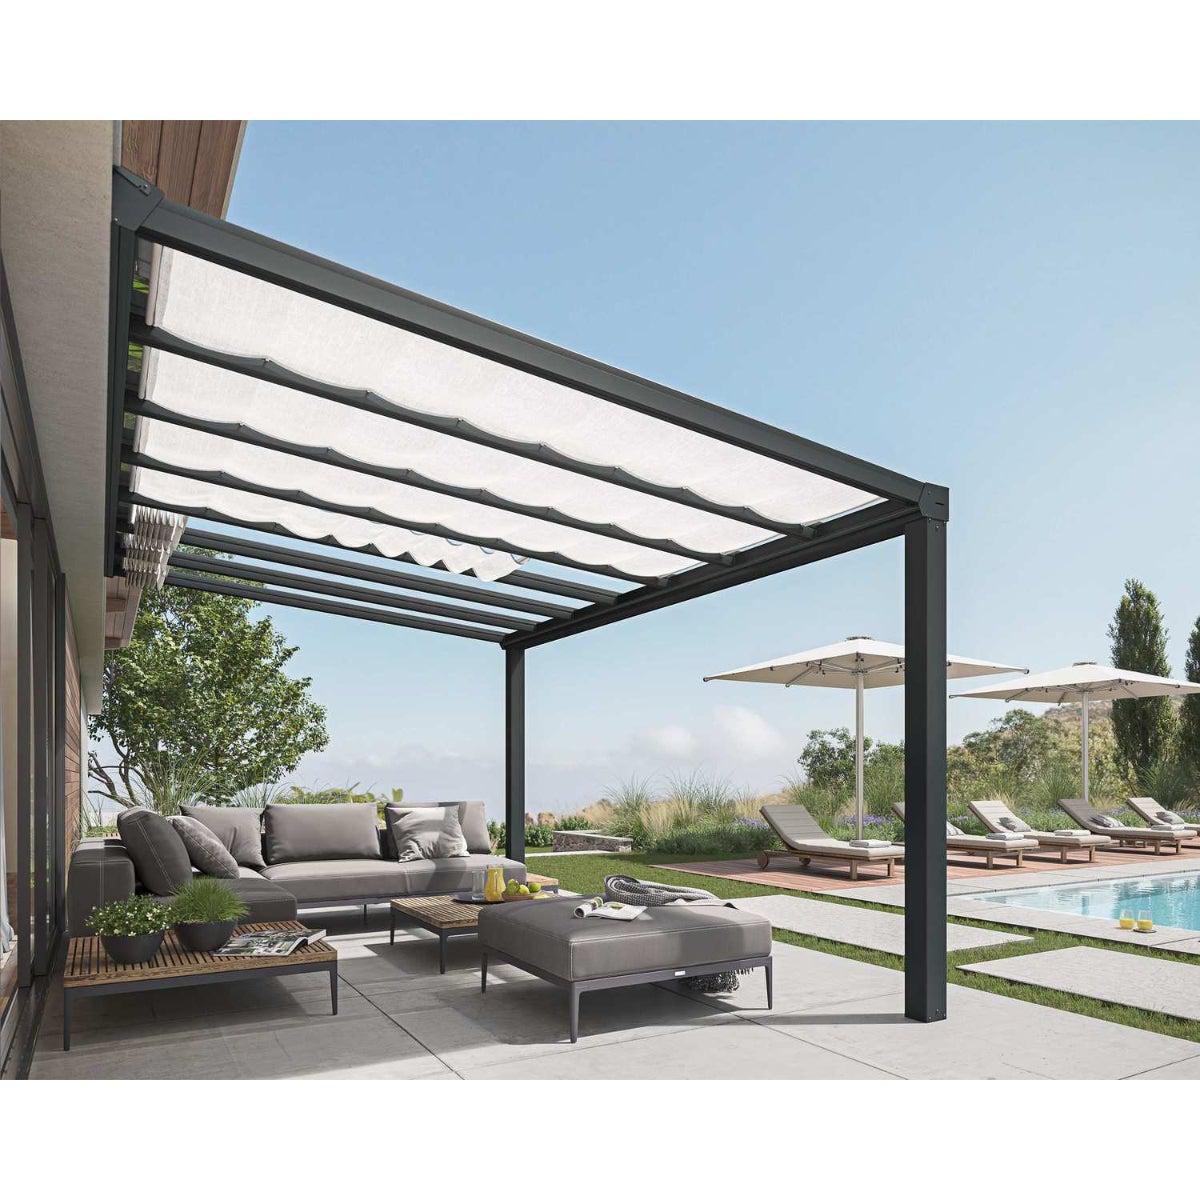 Stockholm Patio Covers 11 x 17 ft. Clear Panels | Palram-Canopia - Delightful Yard